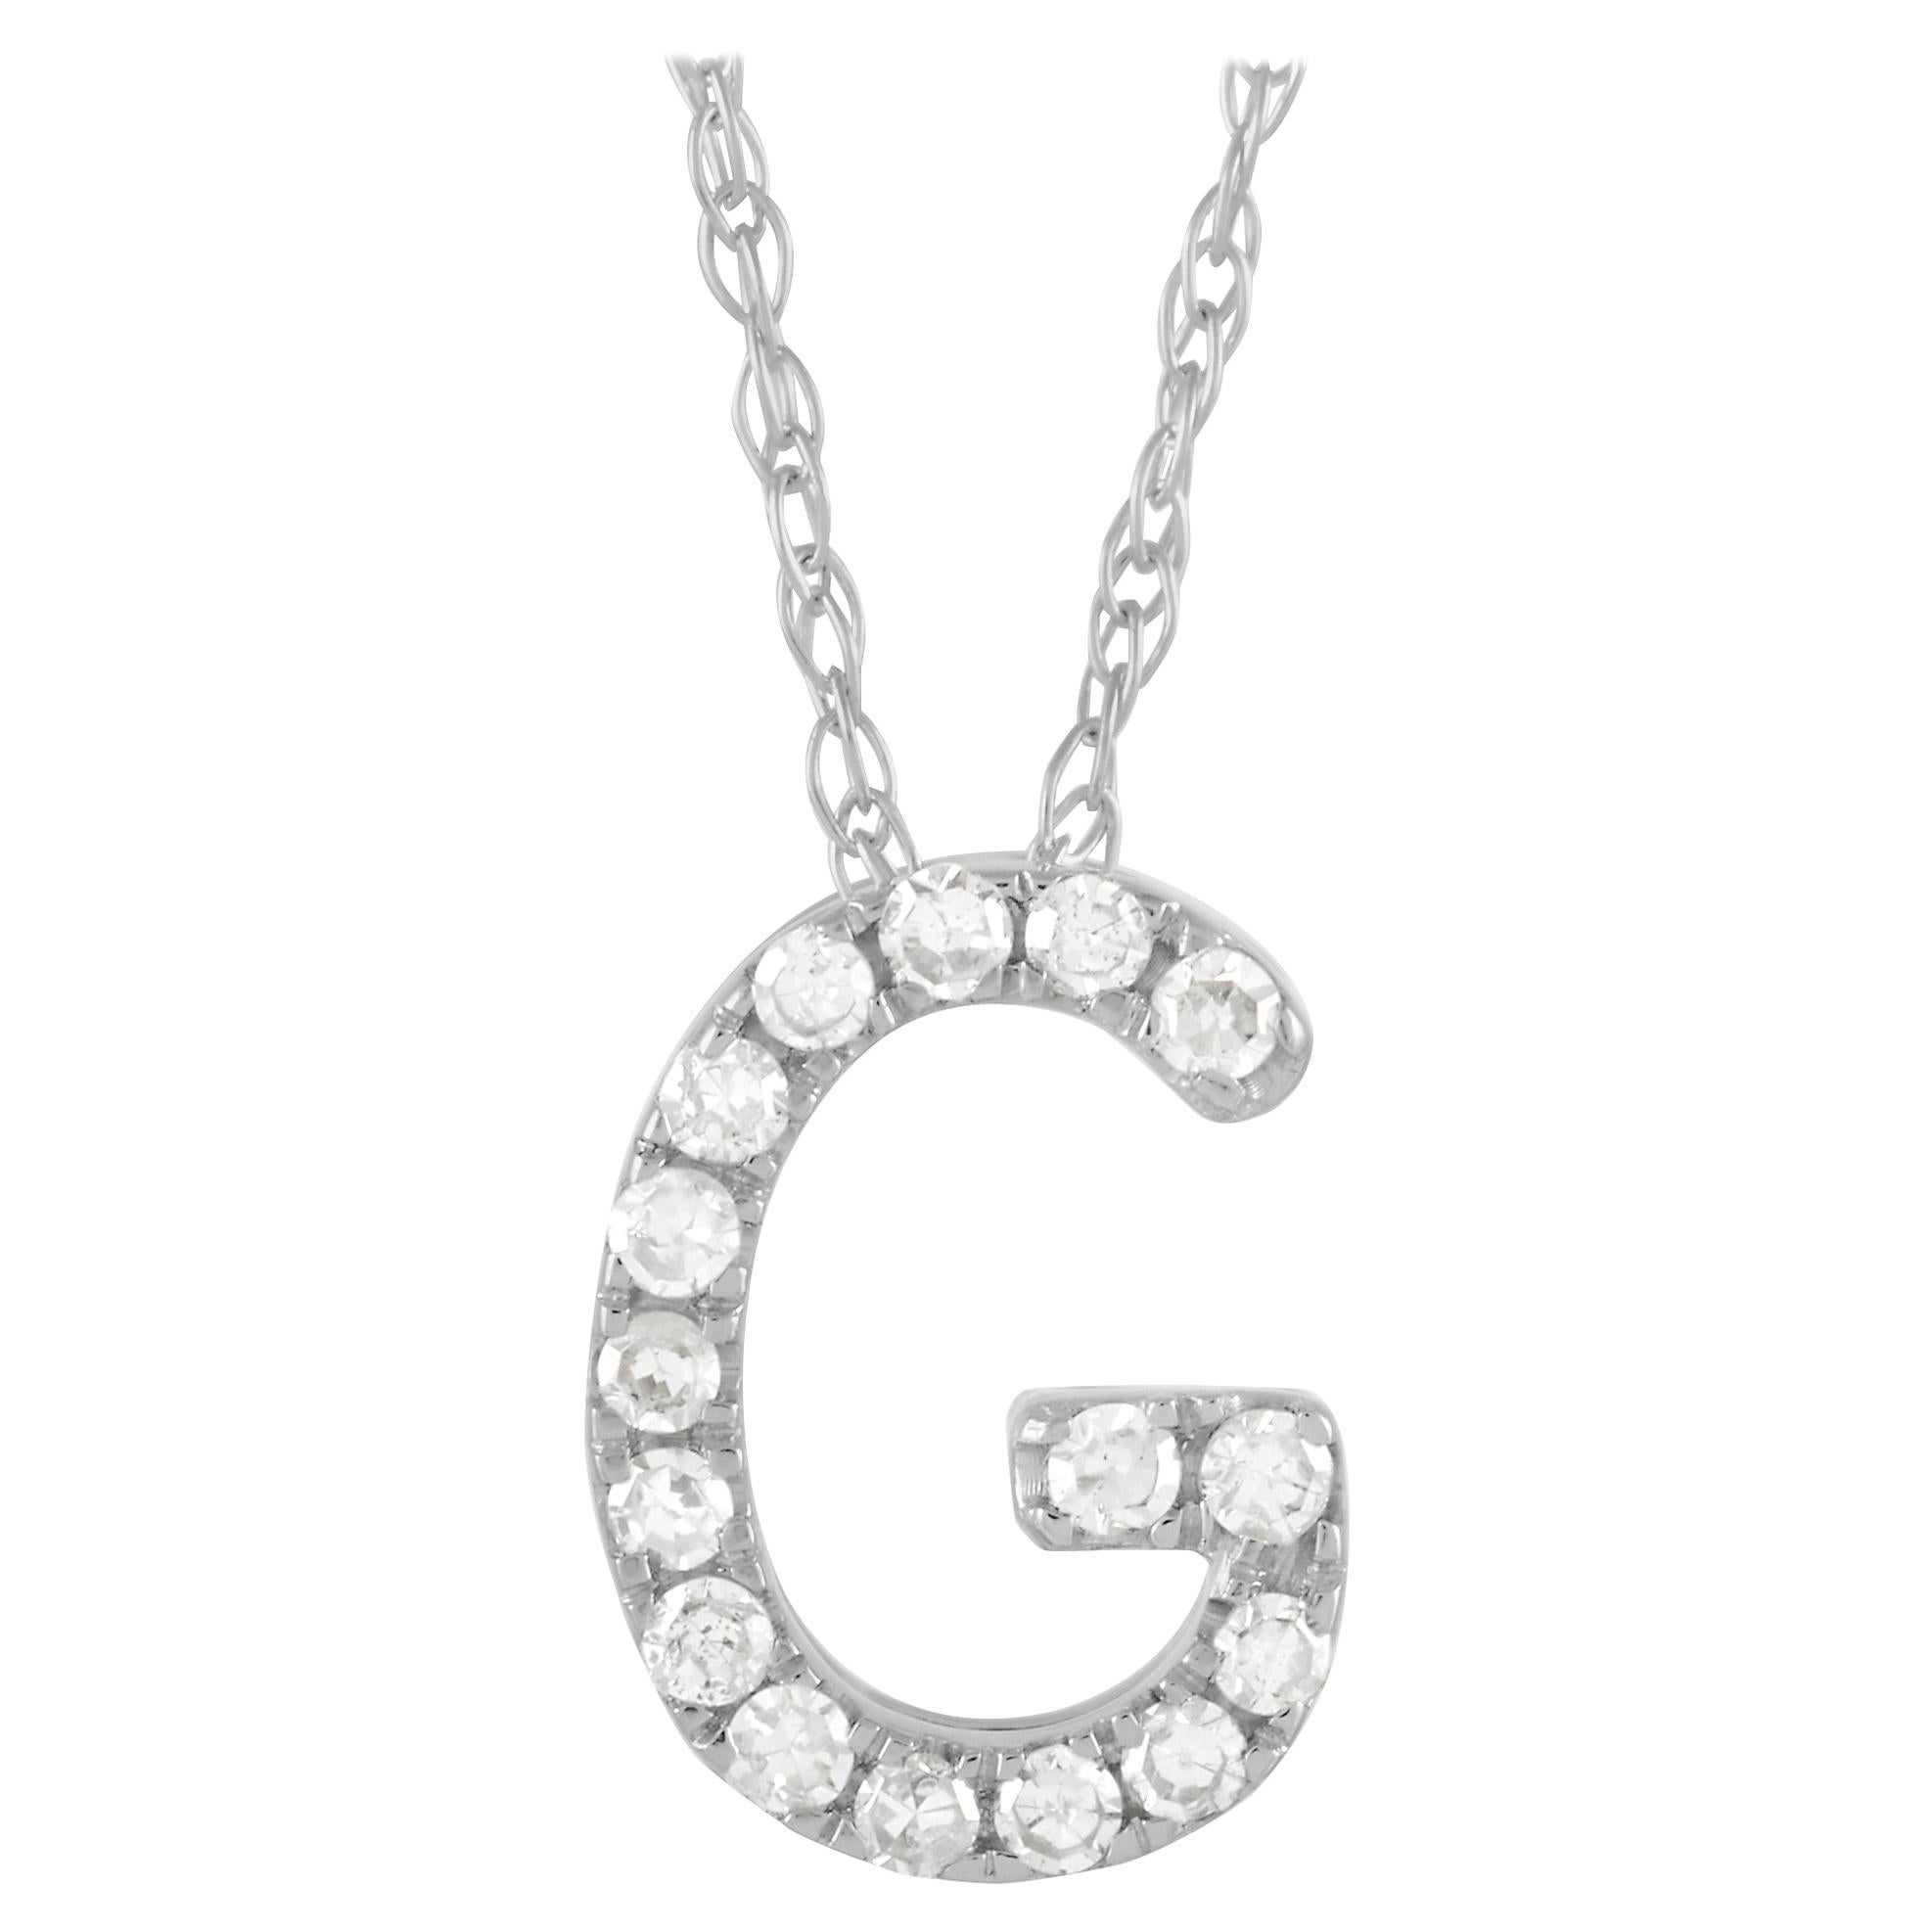 LB Exclusive 14K White Gold 0.10ct Diamond Initial 'G' Necklace